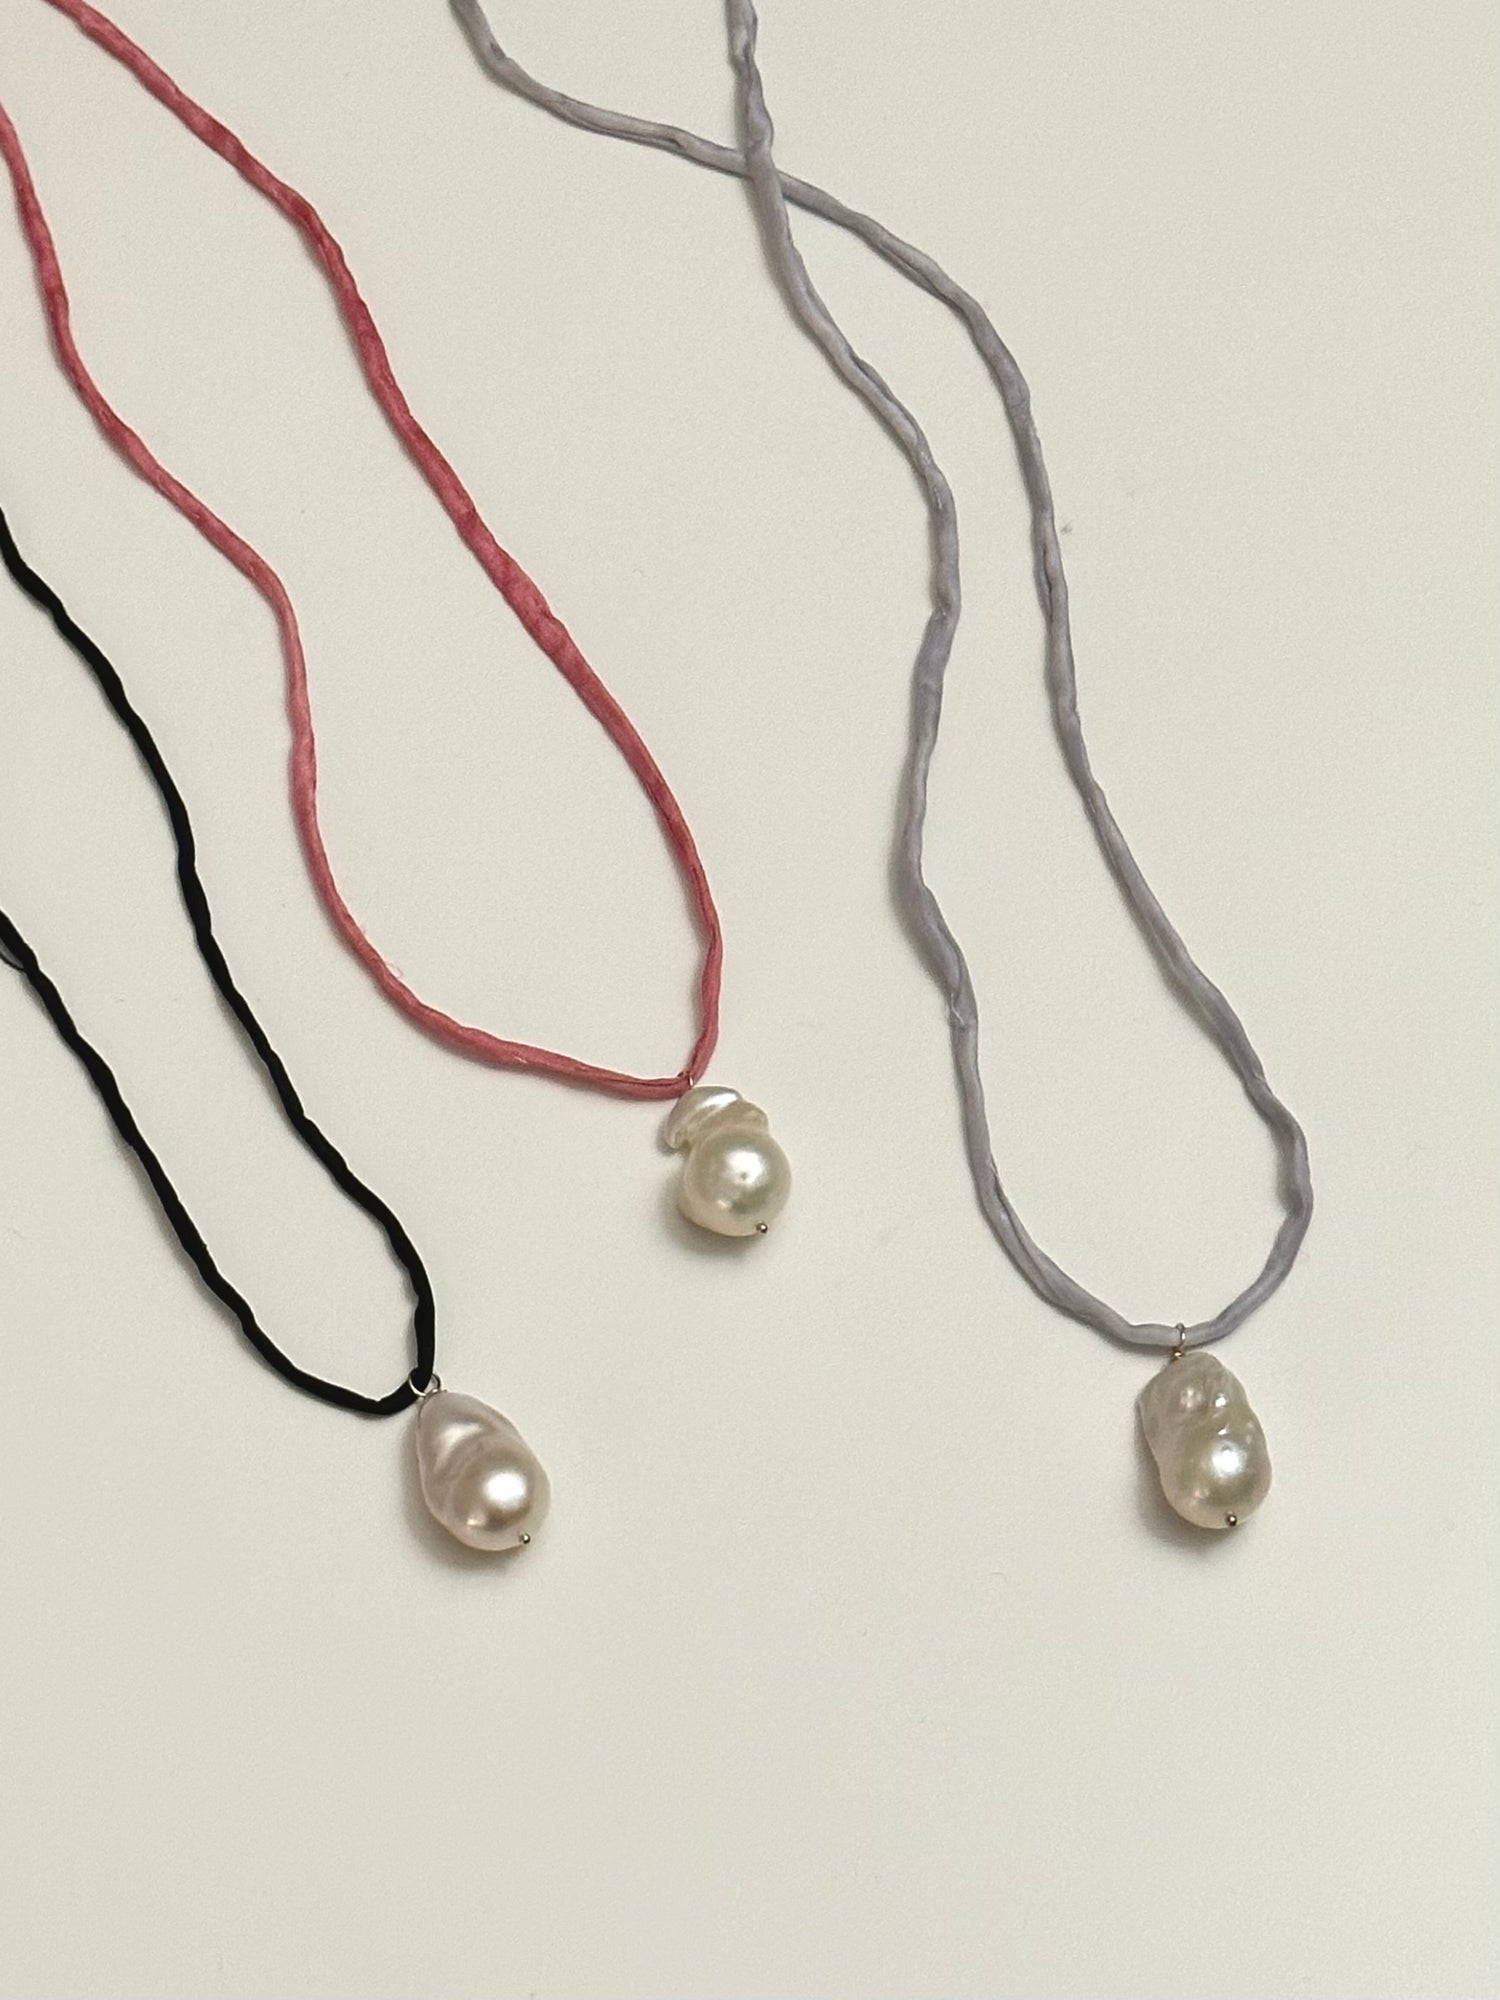 Perle Cord Necklace - BEBE ROUGE